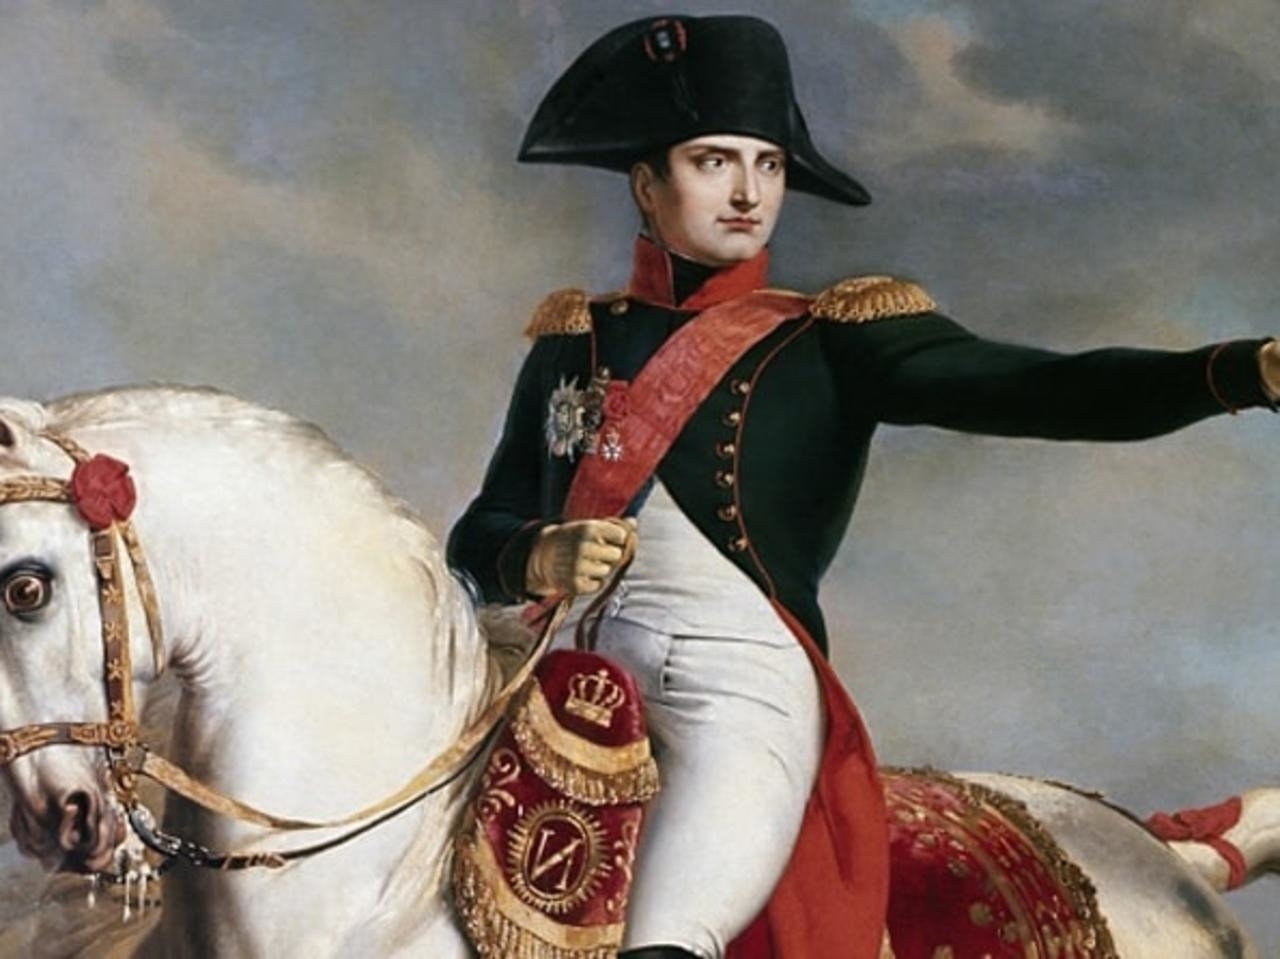 what are the best biographies of napoleon